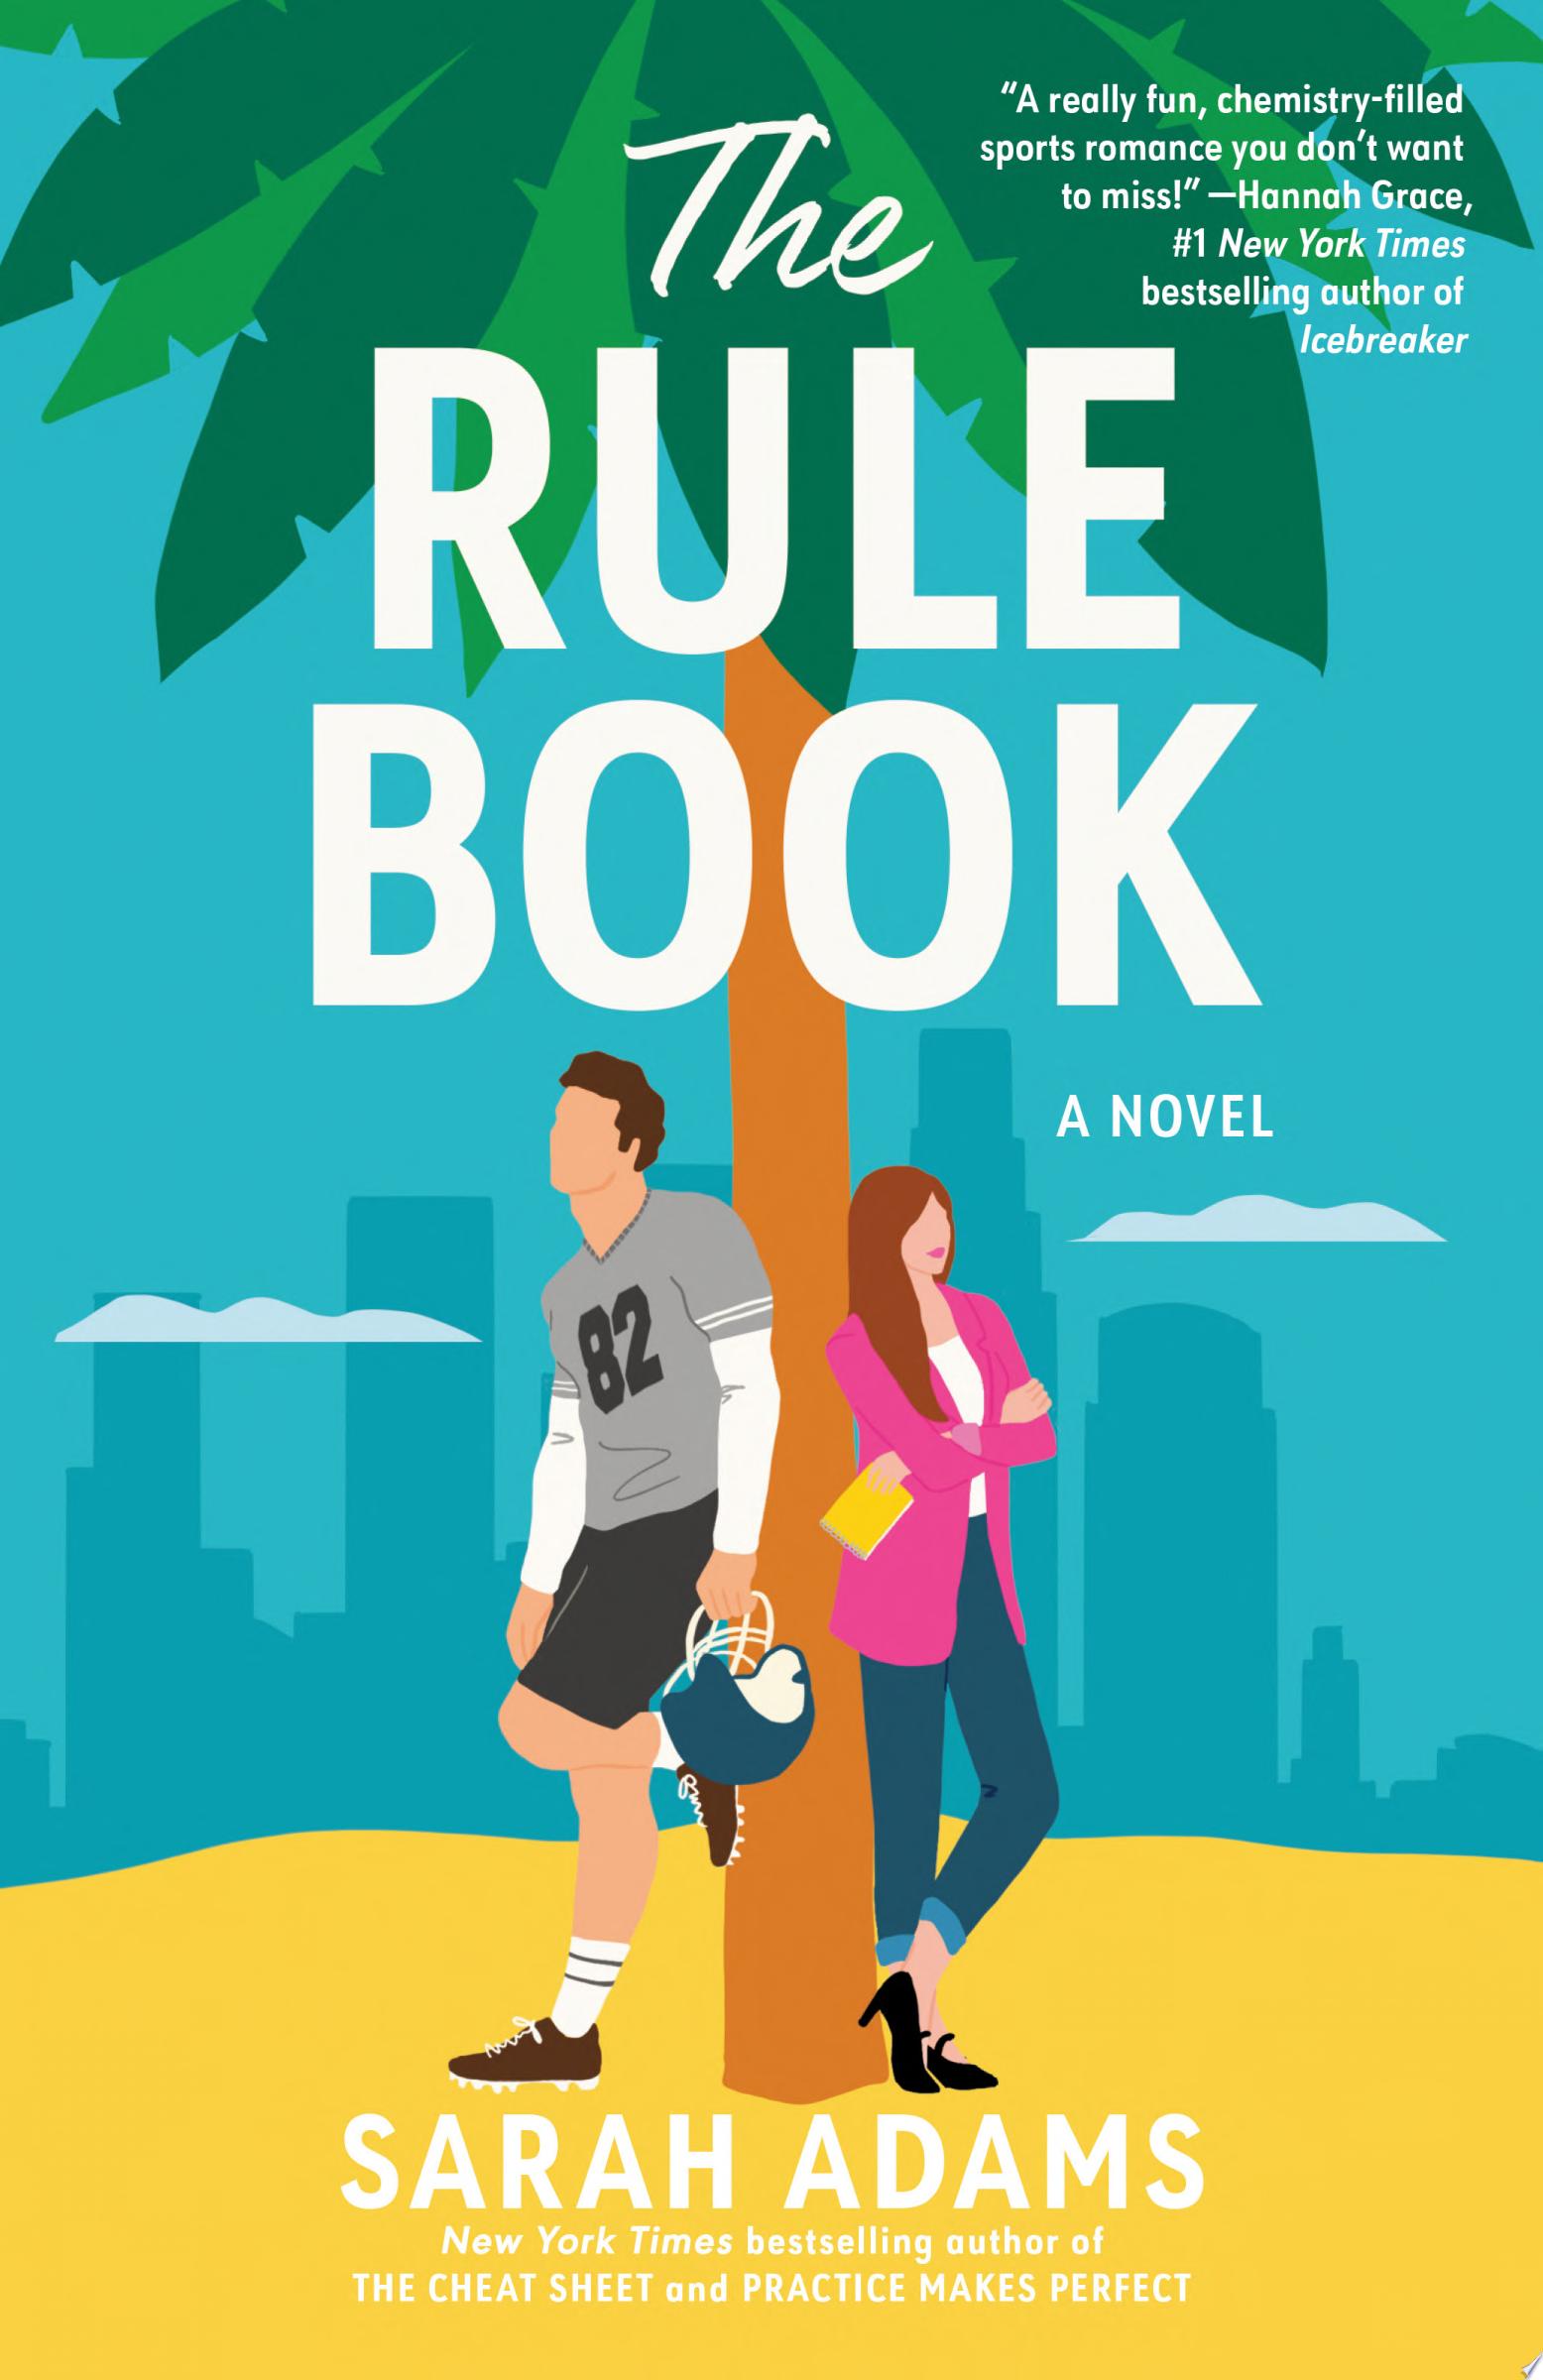 Image for "The Rule Book"